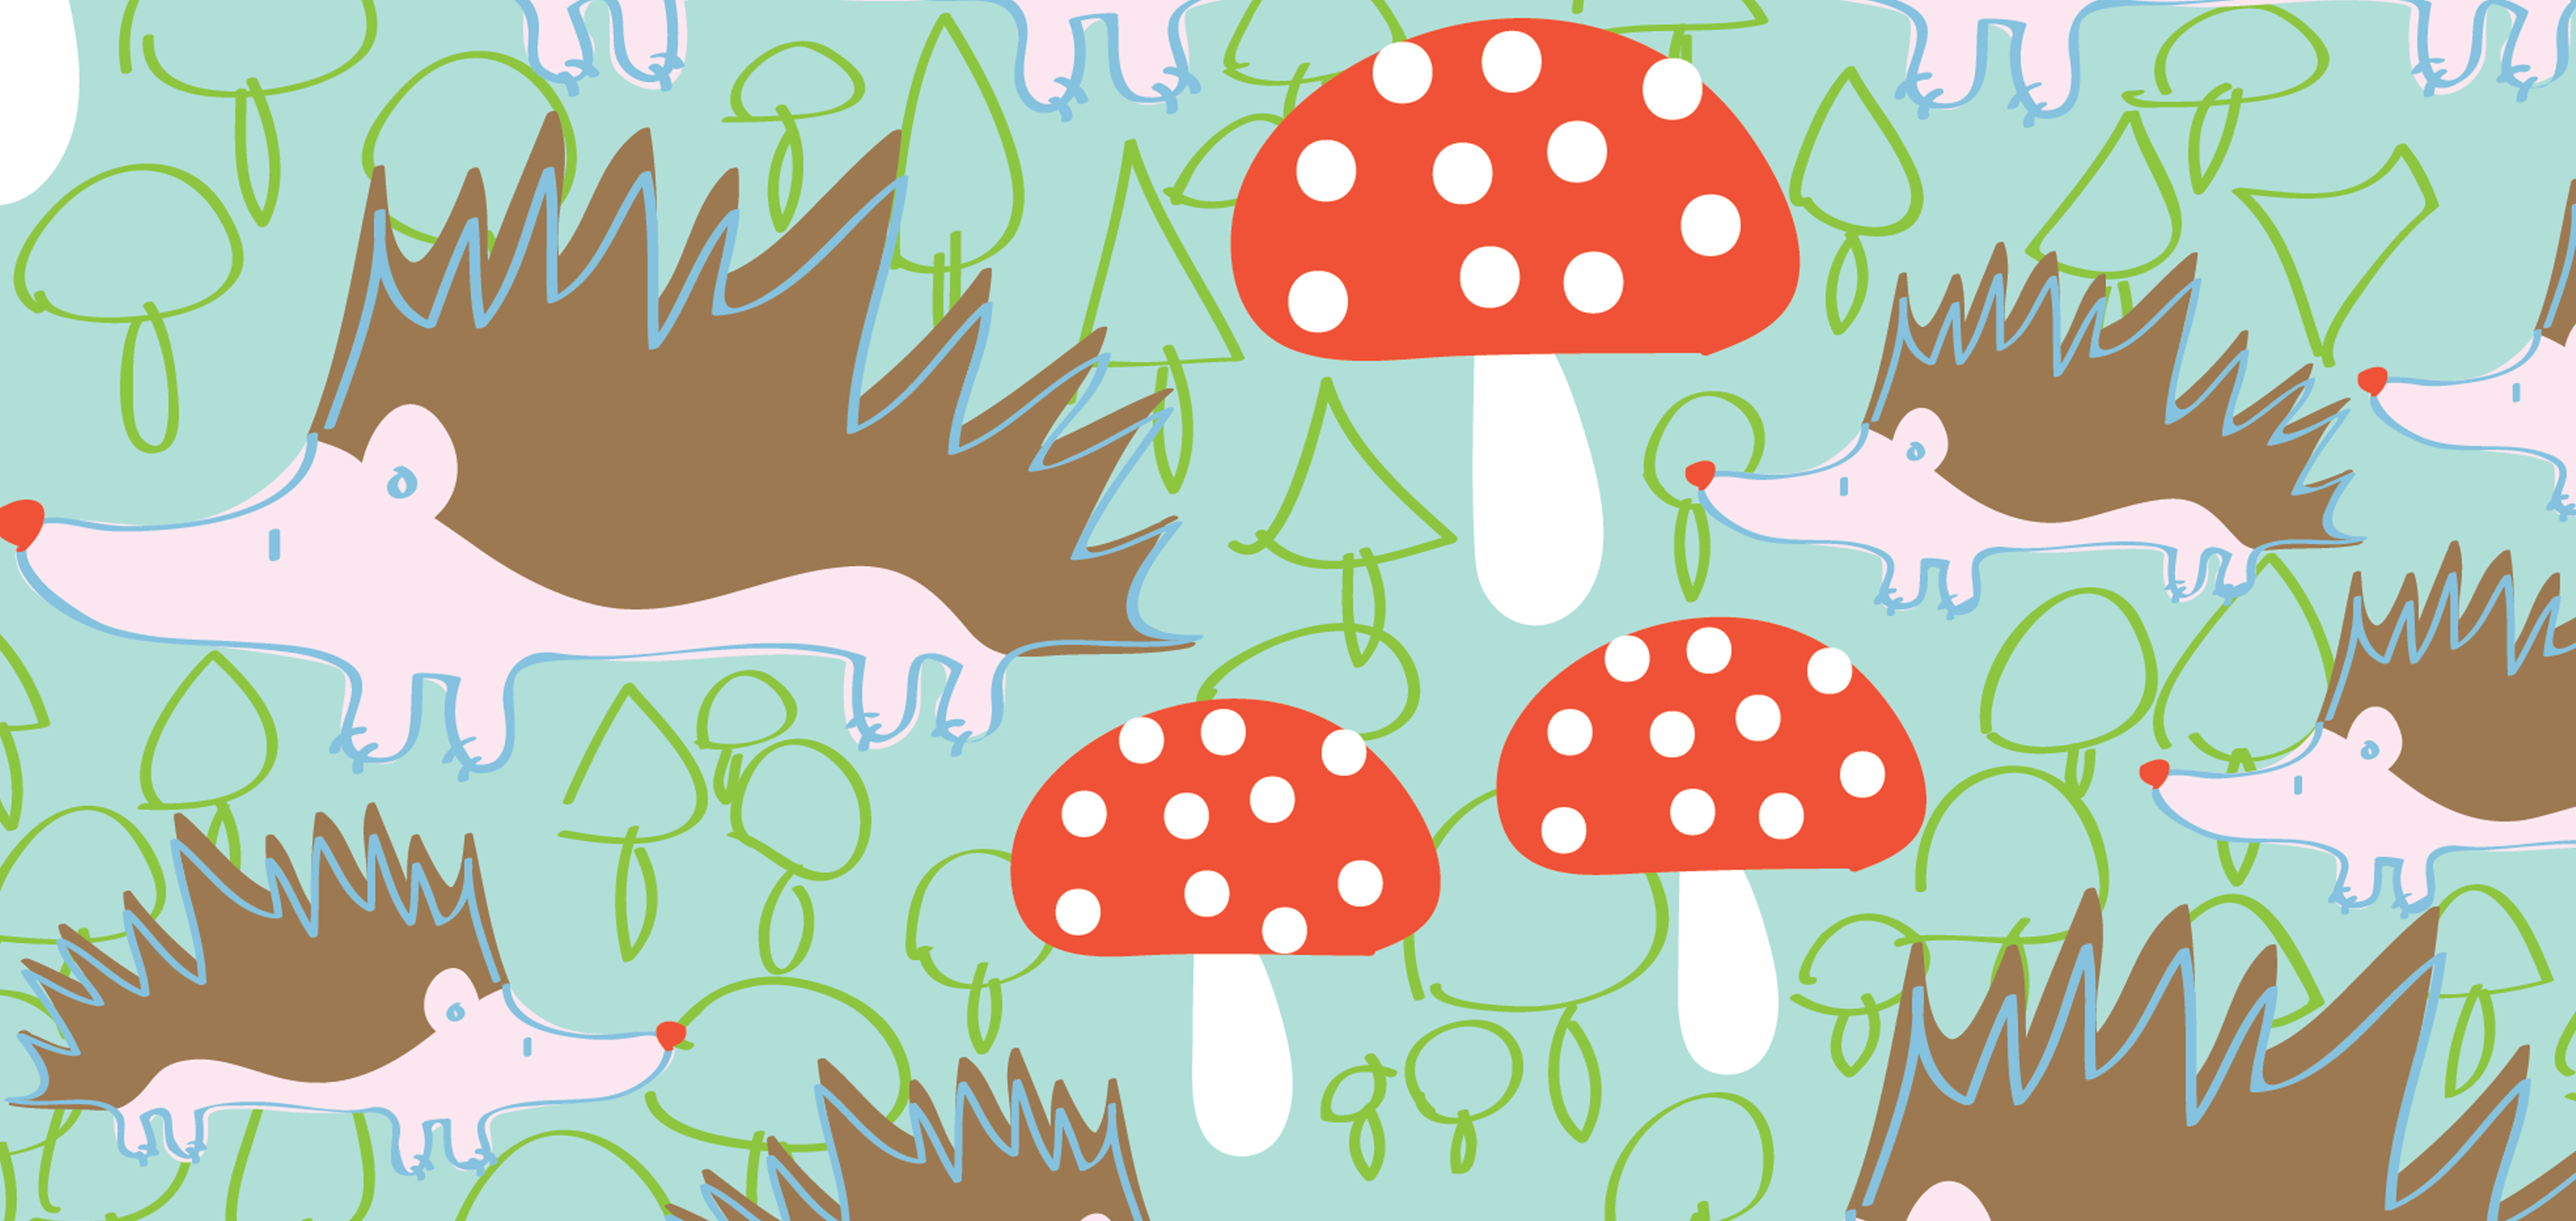 A design by Solvejg with hedgehogs with brown backs and white bodies, outlined in turquoise, small green outlined trees and red-capped mushrooms with white dots and white stems on a mint background 